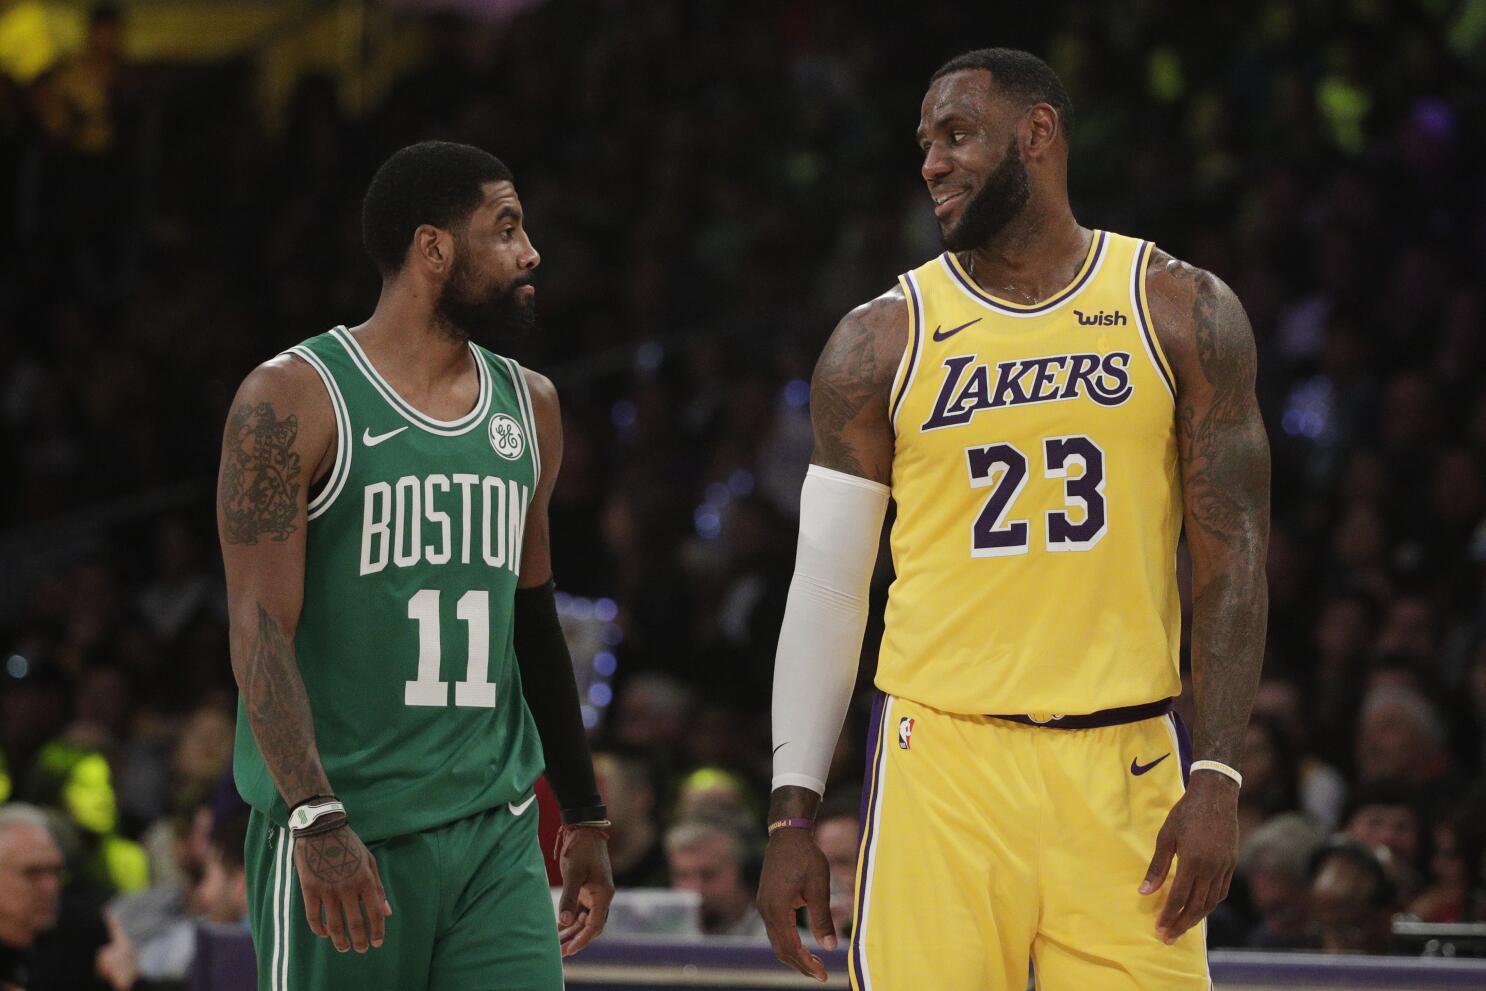 Knowing Kyrie Irving most likely he just didn't show up: NBA